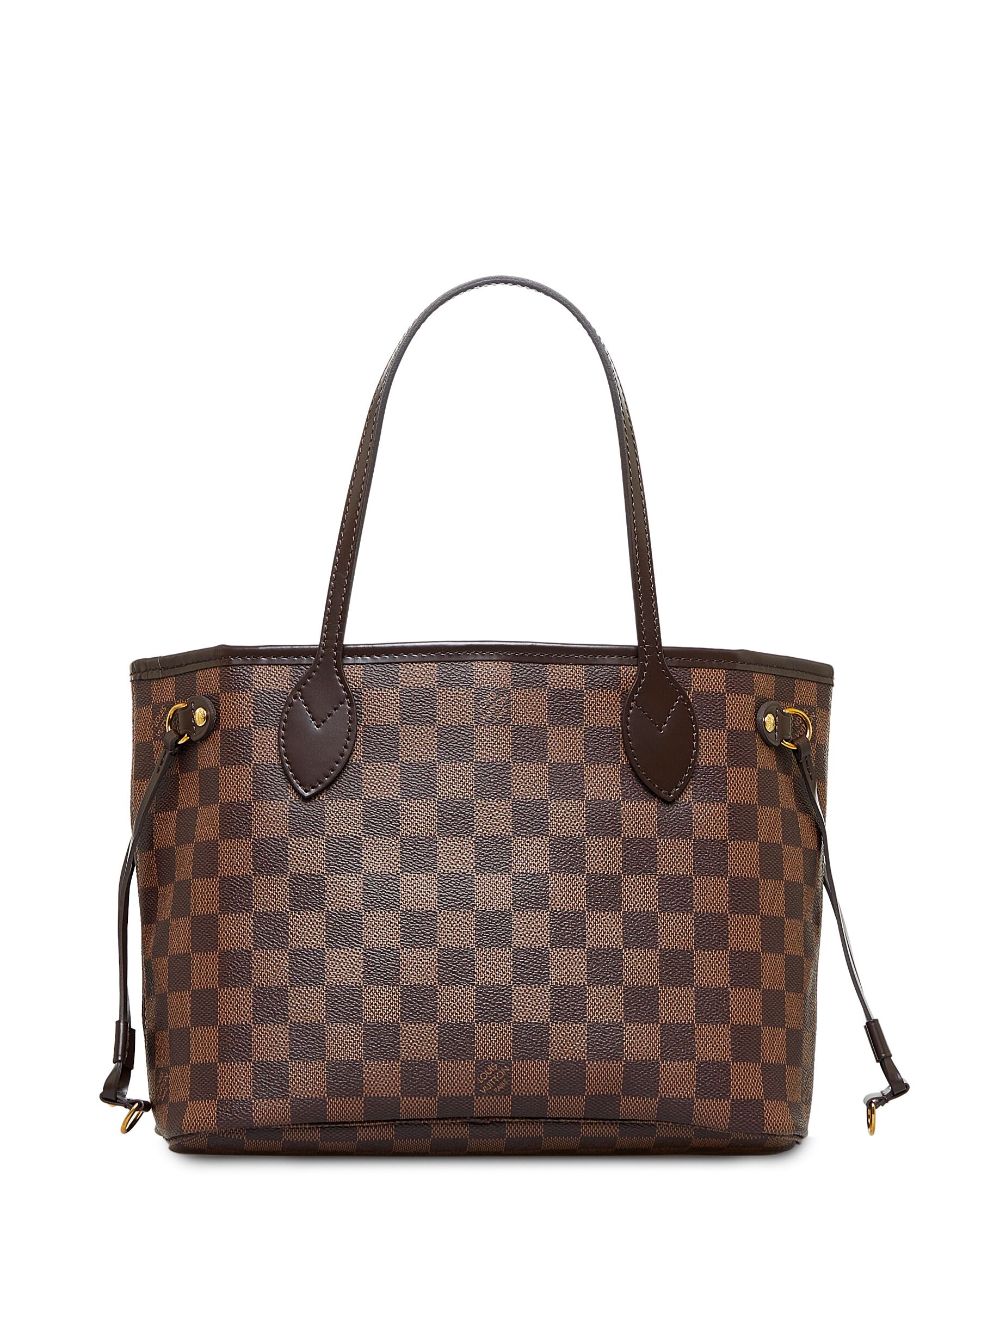 Louis Vuitton 2017 pre-owned Neverfull PM tote bag - Bruin